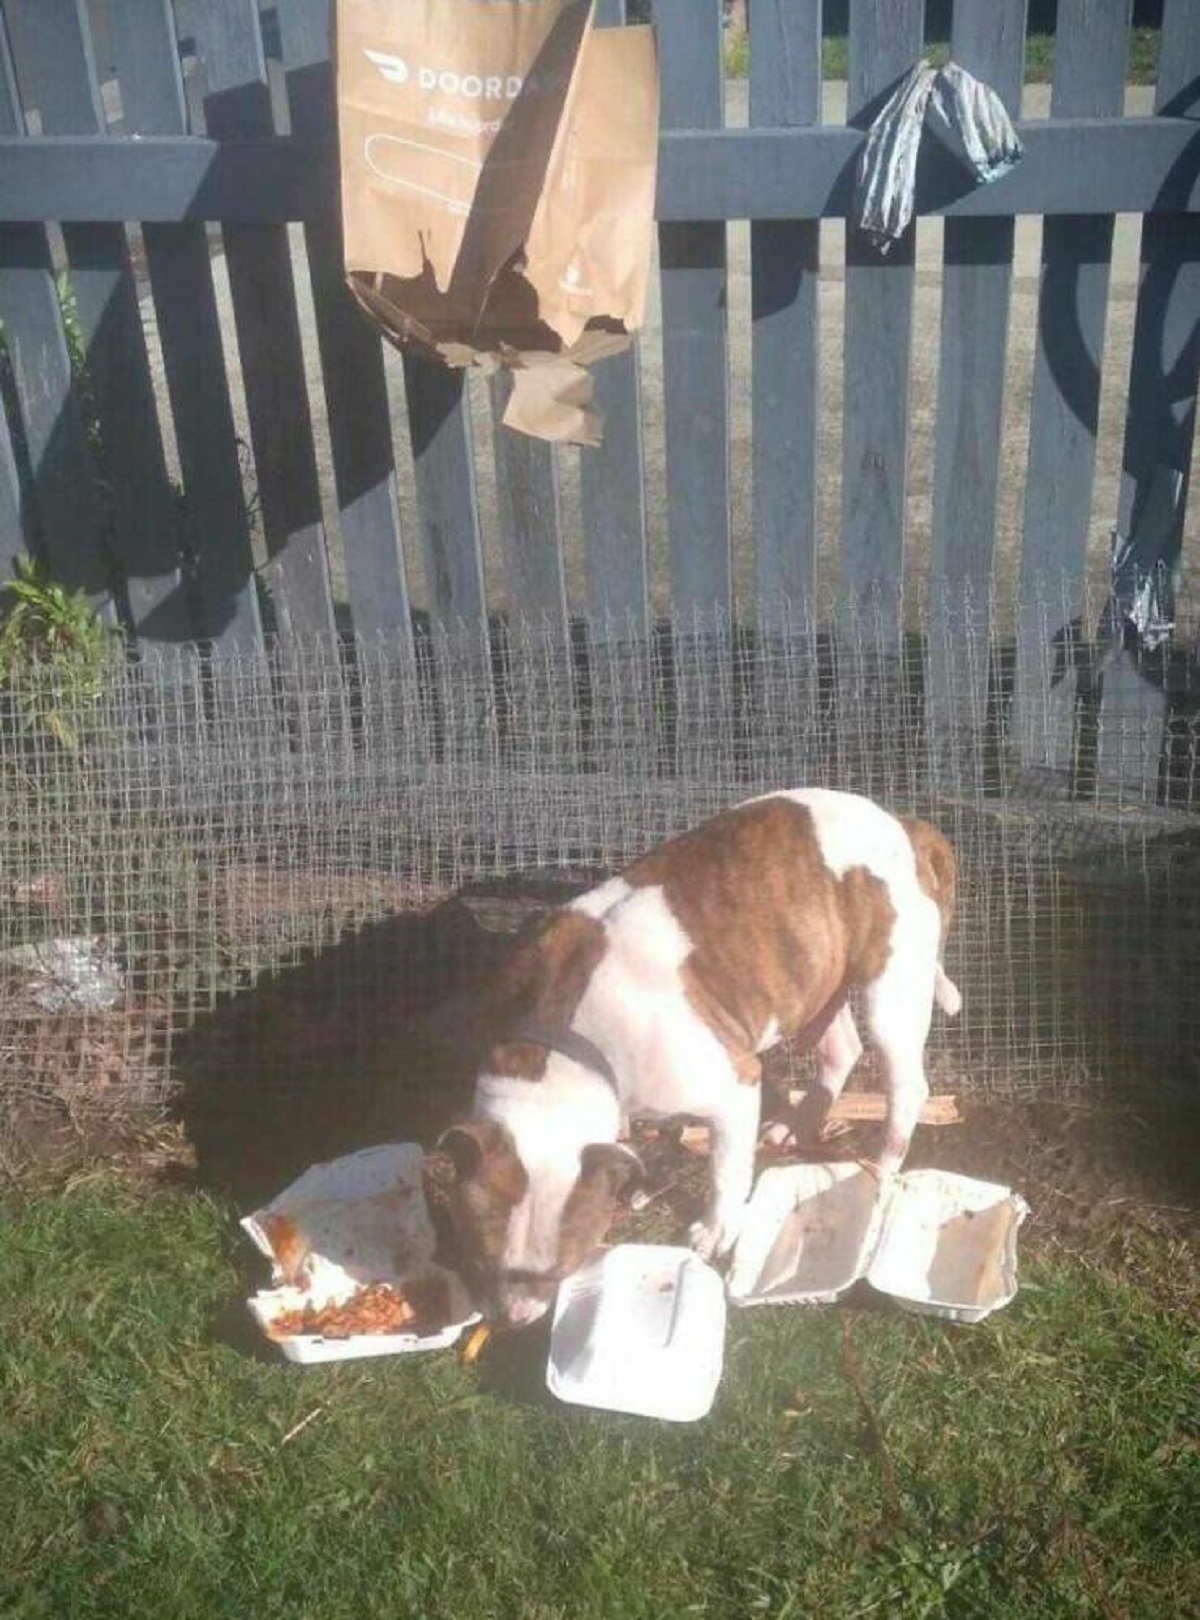 "Delivery Driver Hung Food Order On My Fence And My Dog Ate It Every Single Bite"